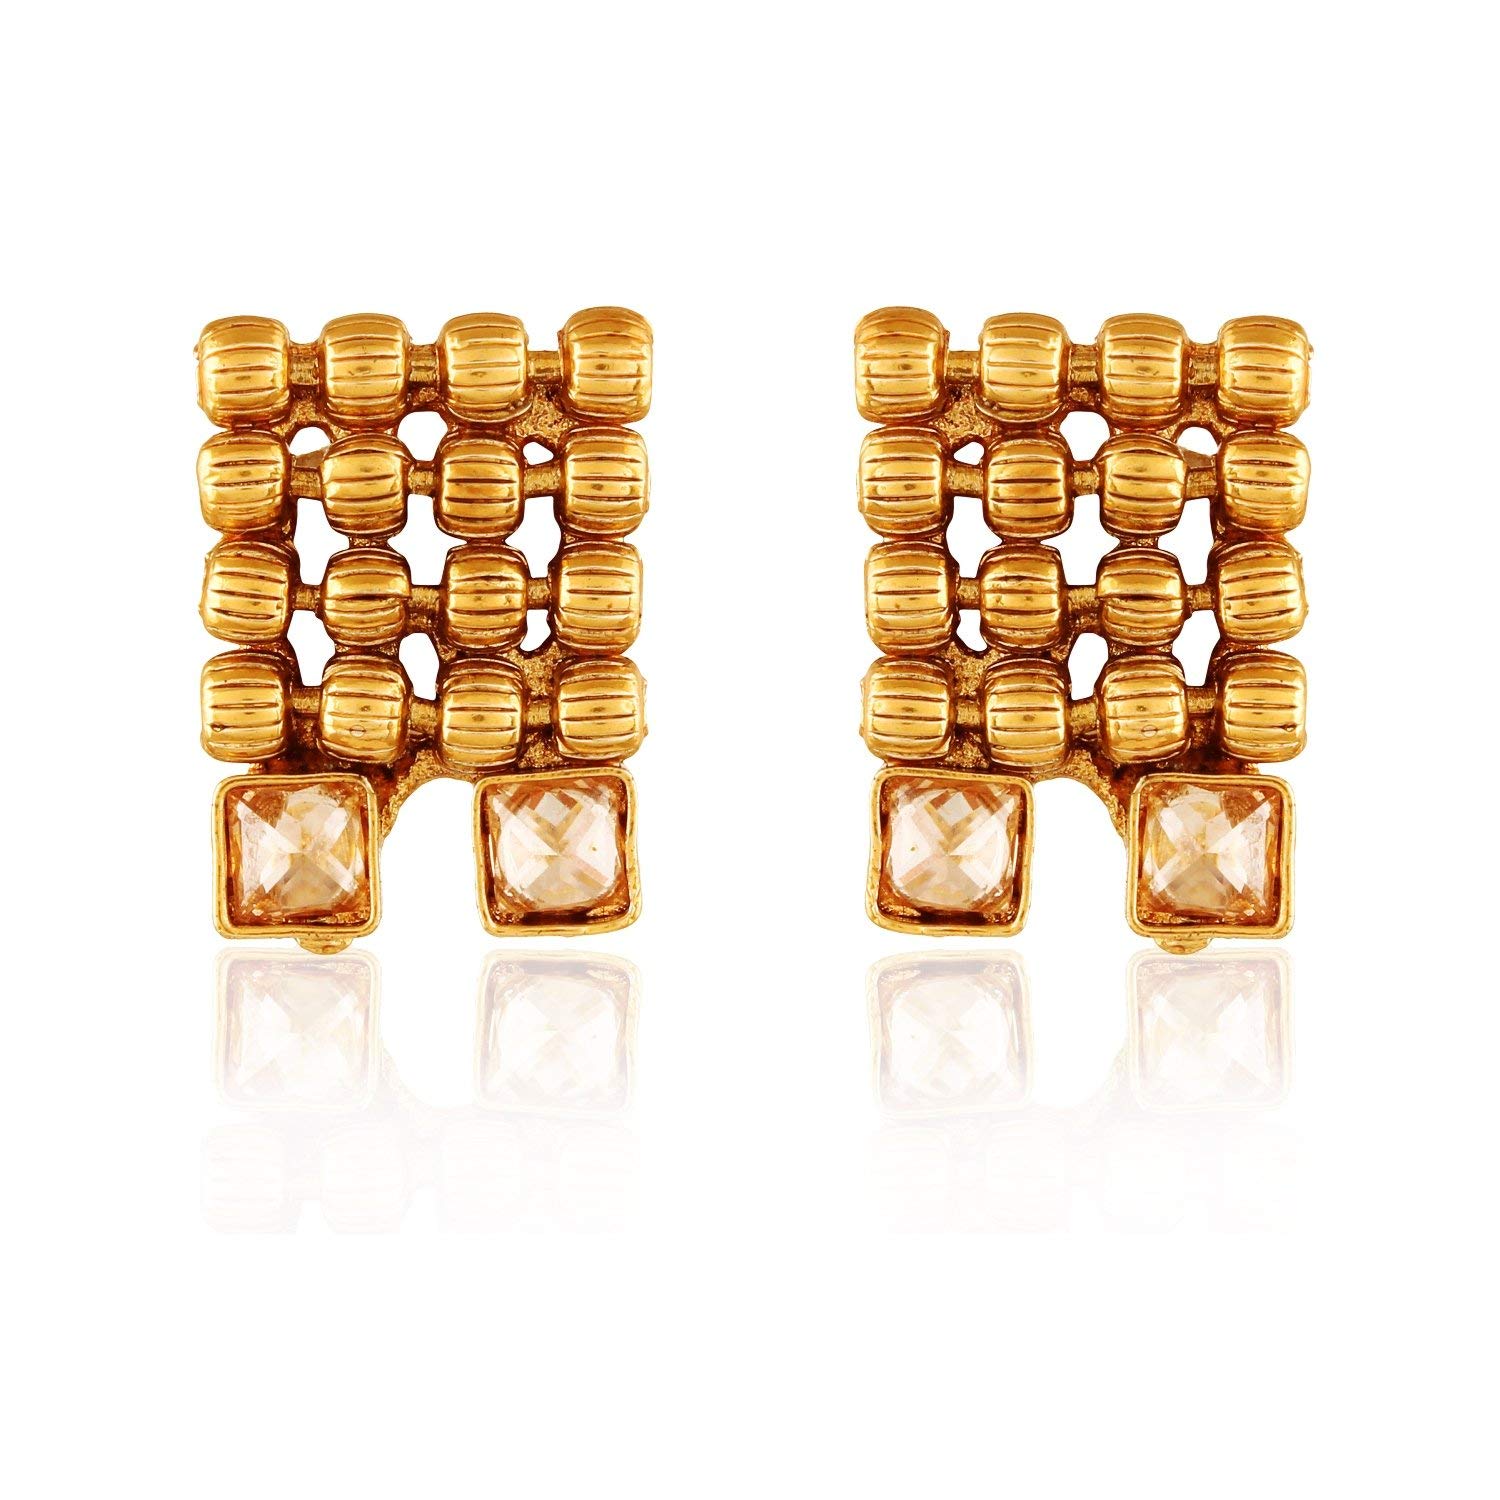 AccessHer Antique Gold Square Shaped Small Stud Earrings for Women Price in India